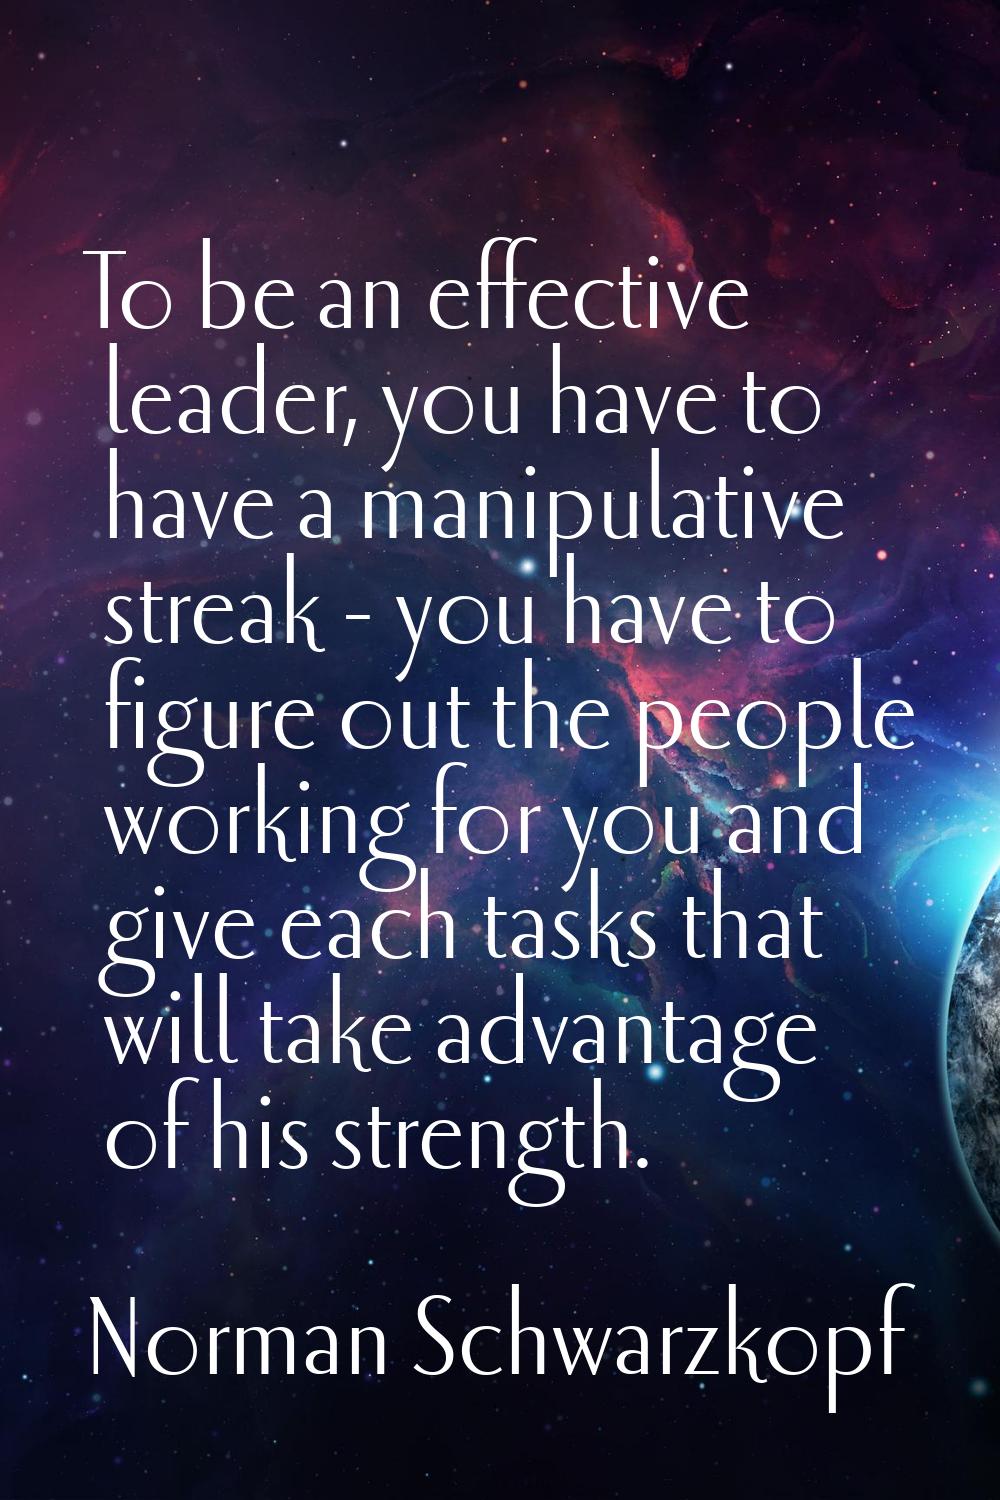 To be an effective leader, you have to have a manipulative streak - you have to figure out the peop